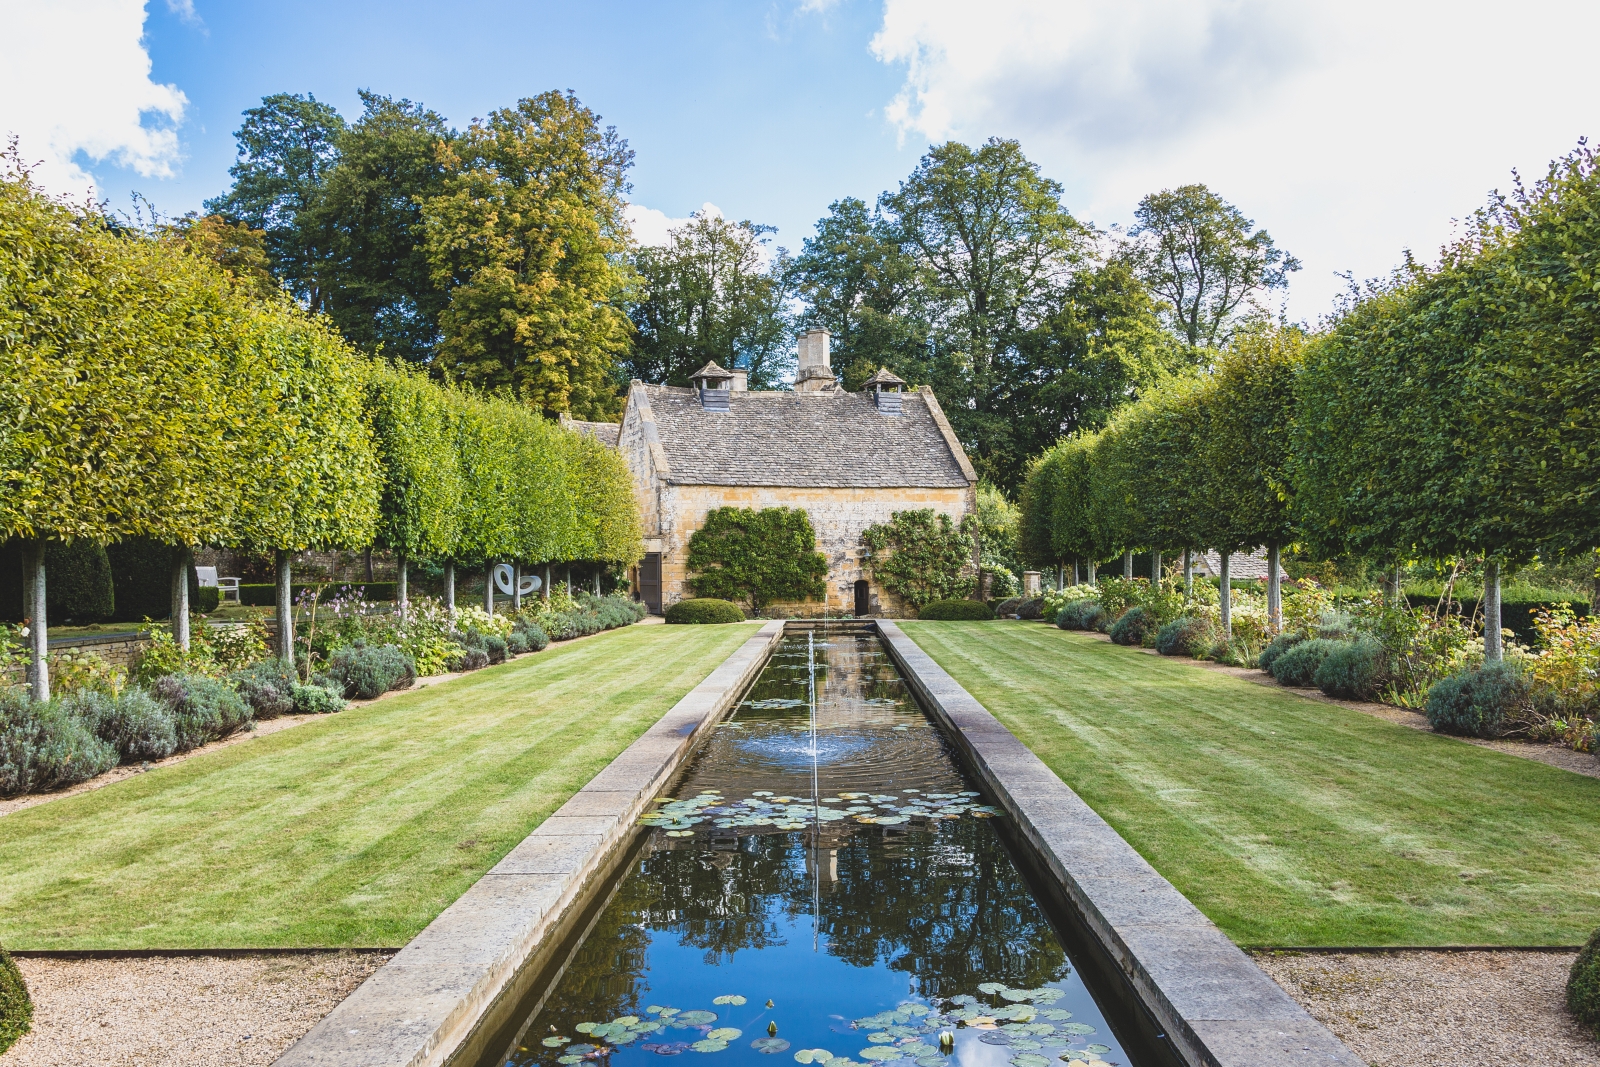 Water feature lined with trees leading to luxury villa Temple Guiting Manor in the Cotswolds